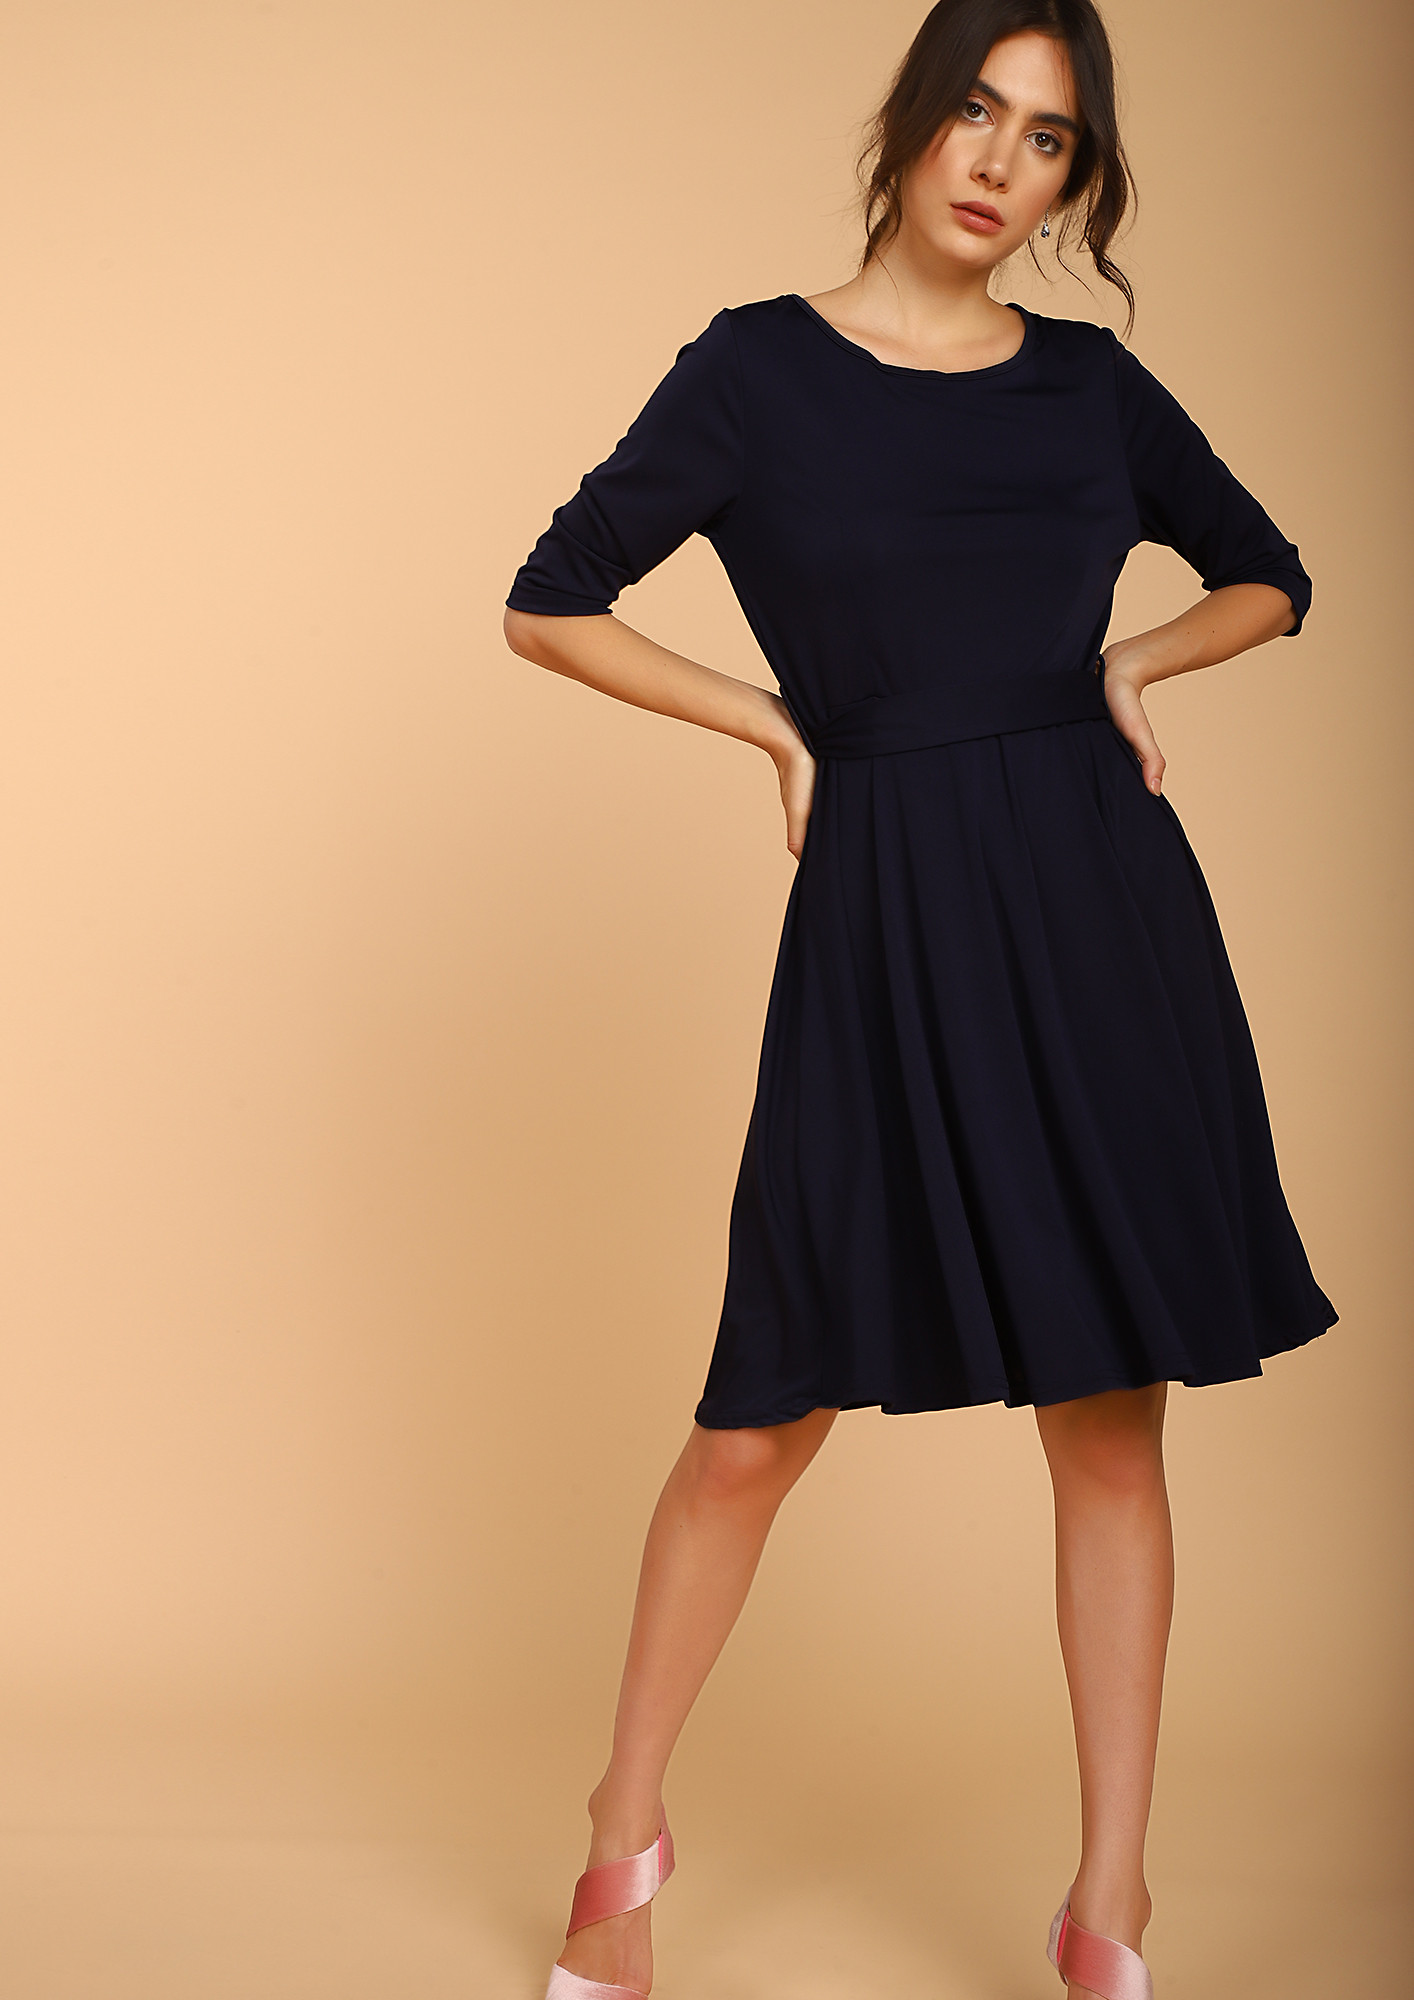 TIE BEFORE YOU TWIRL NAVY SKATER DRESS